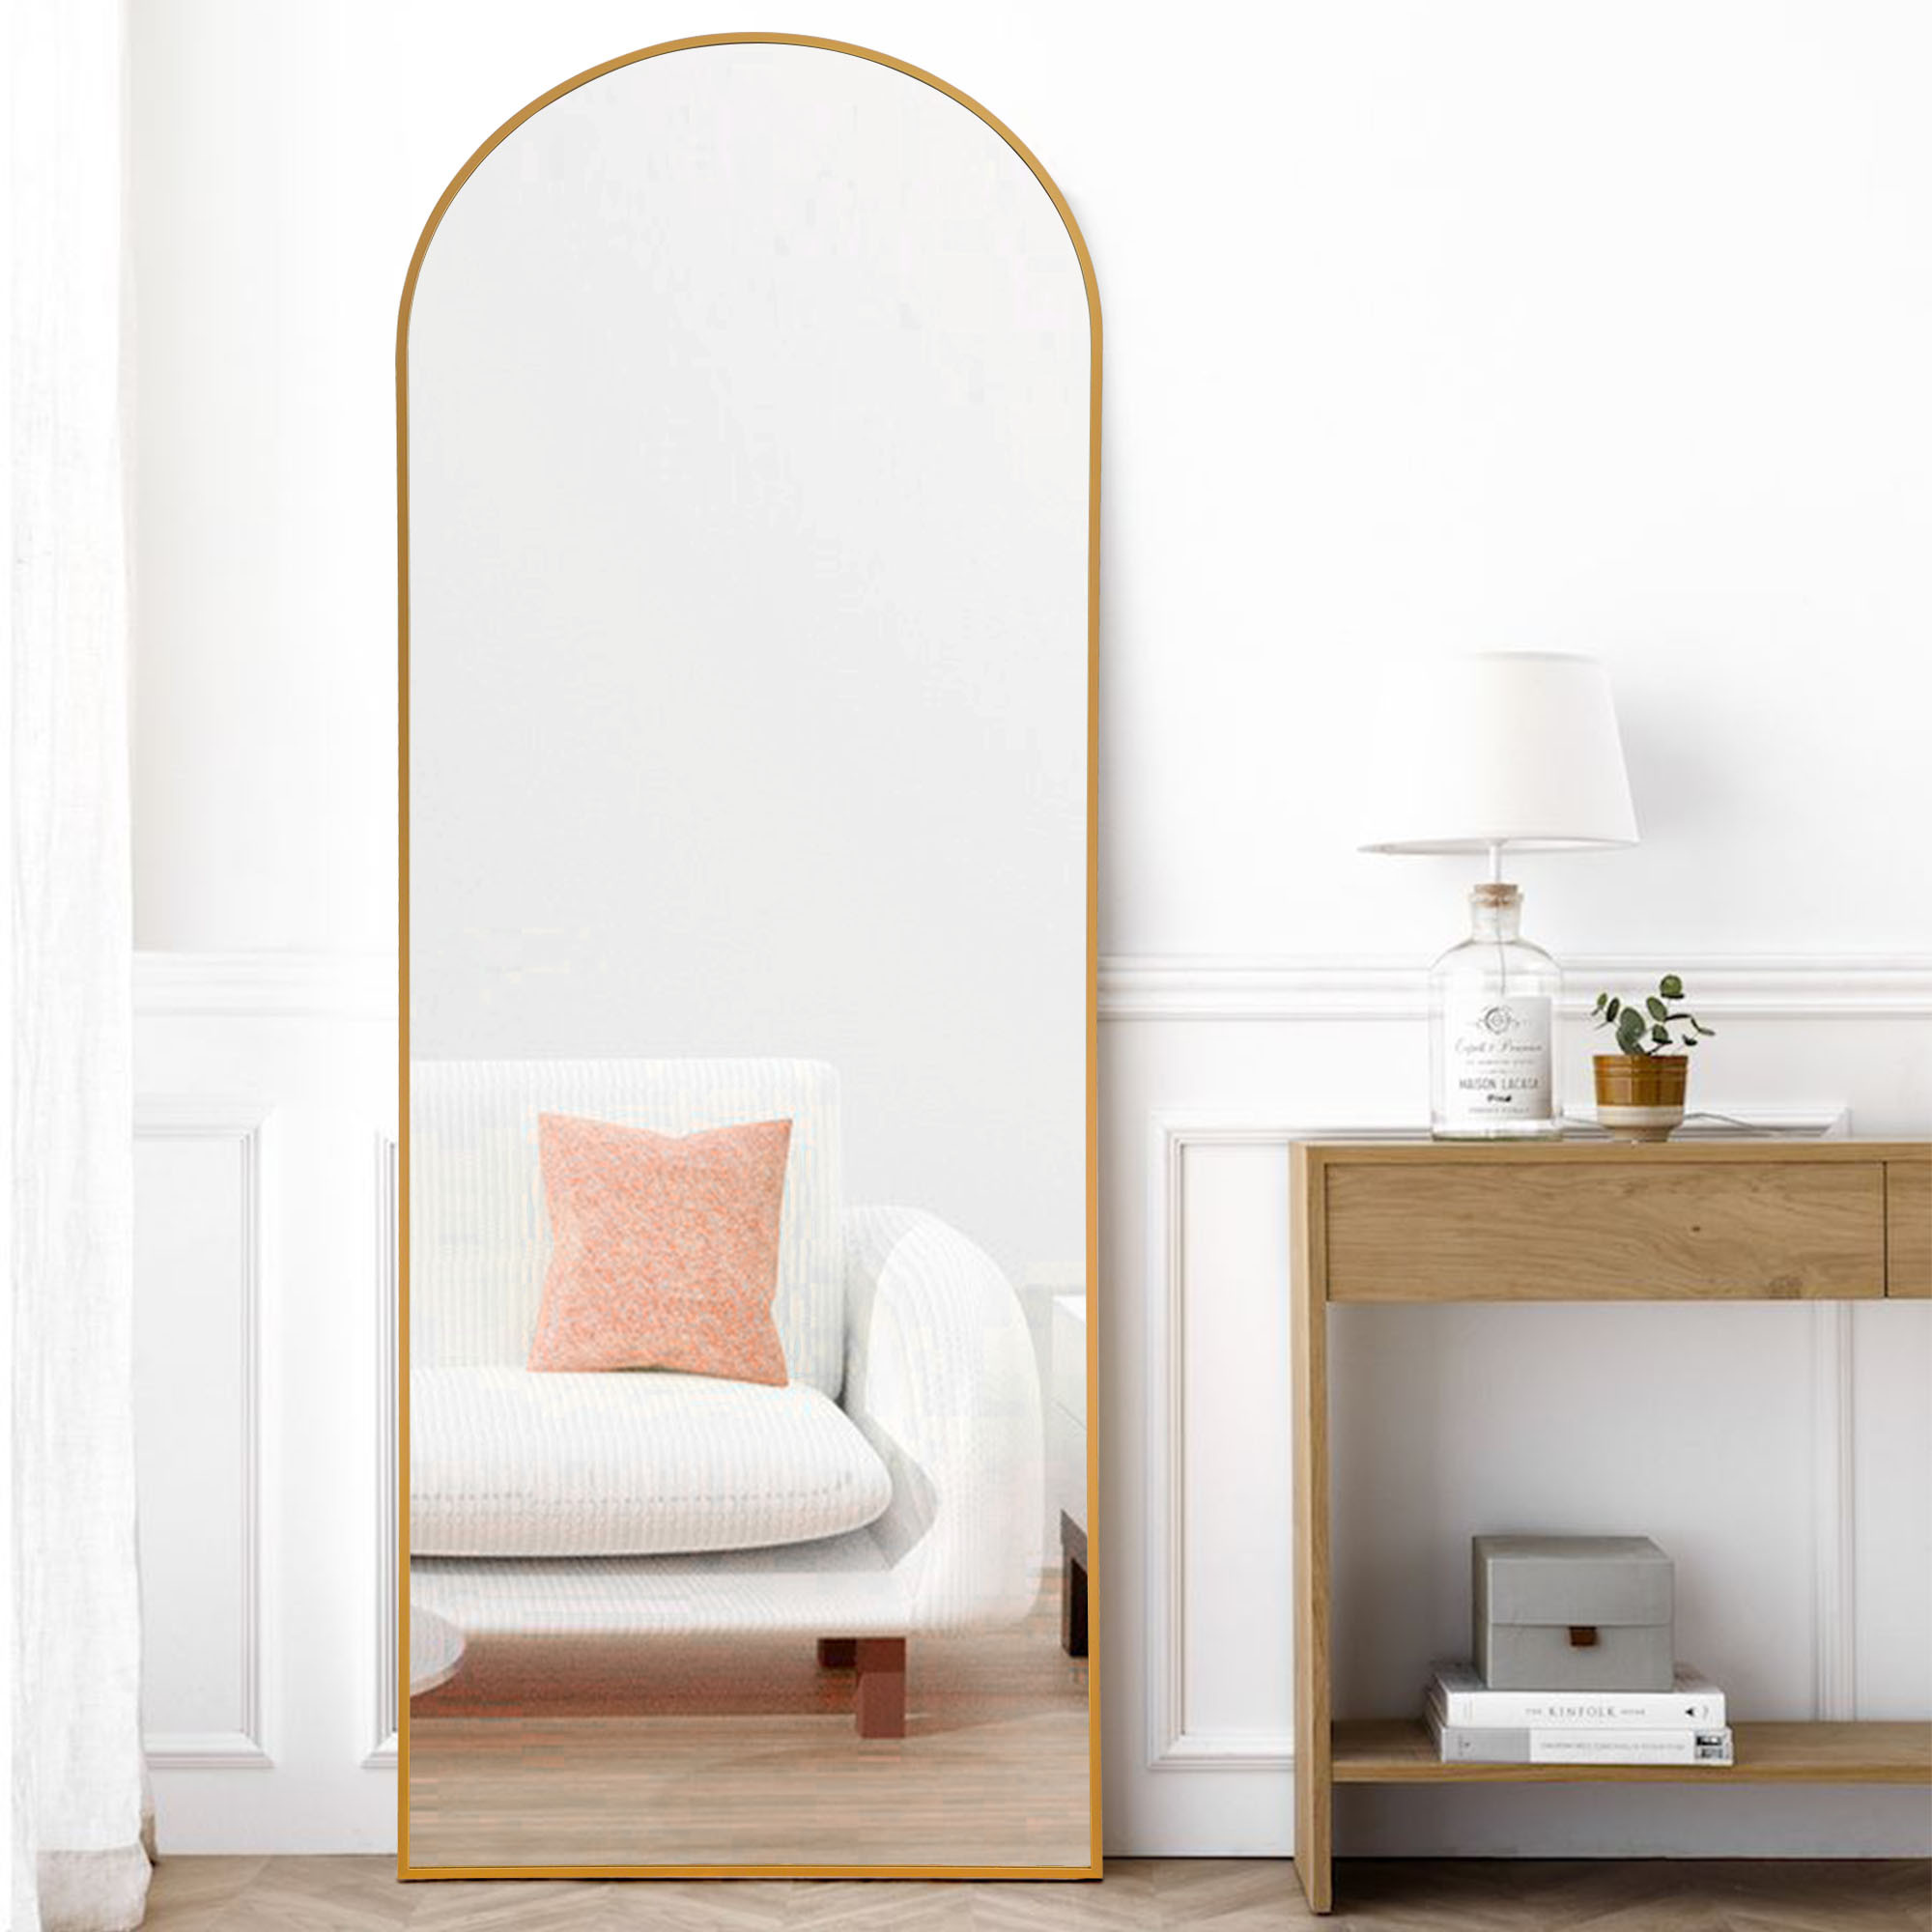 Narrow Gold Arched Full-length Floor Mirror with Stand